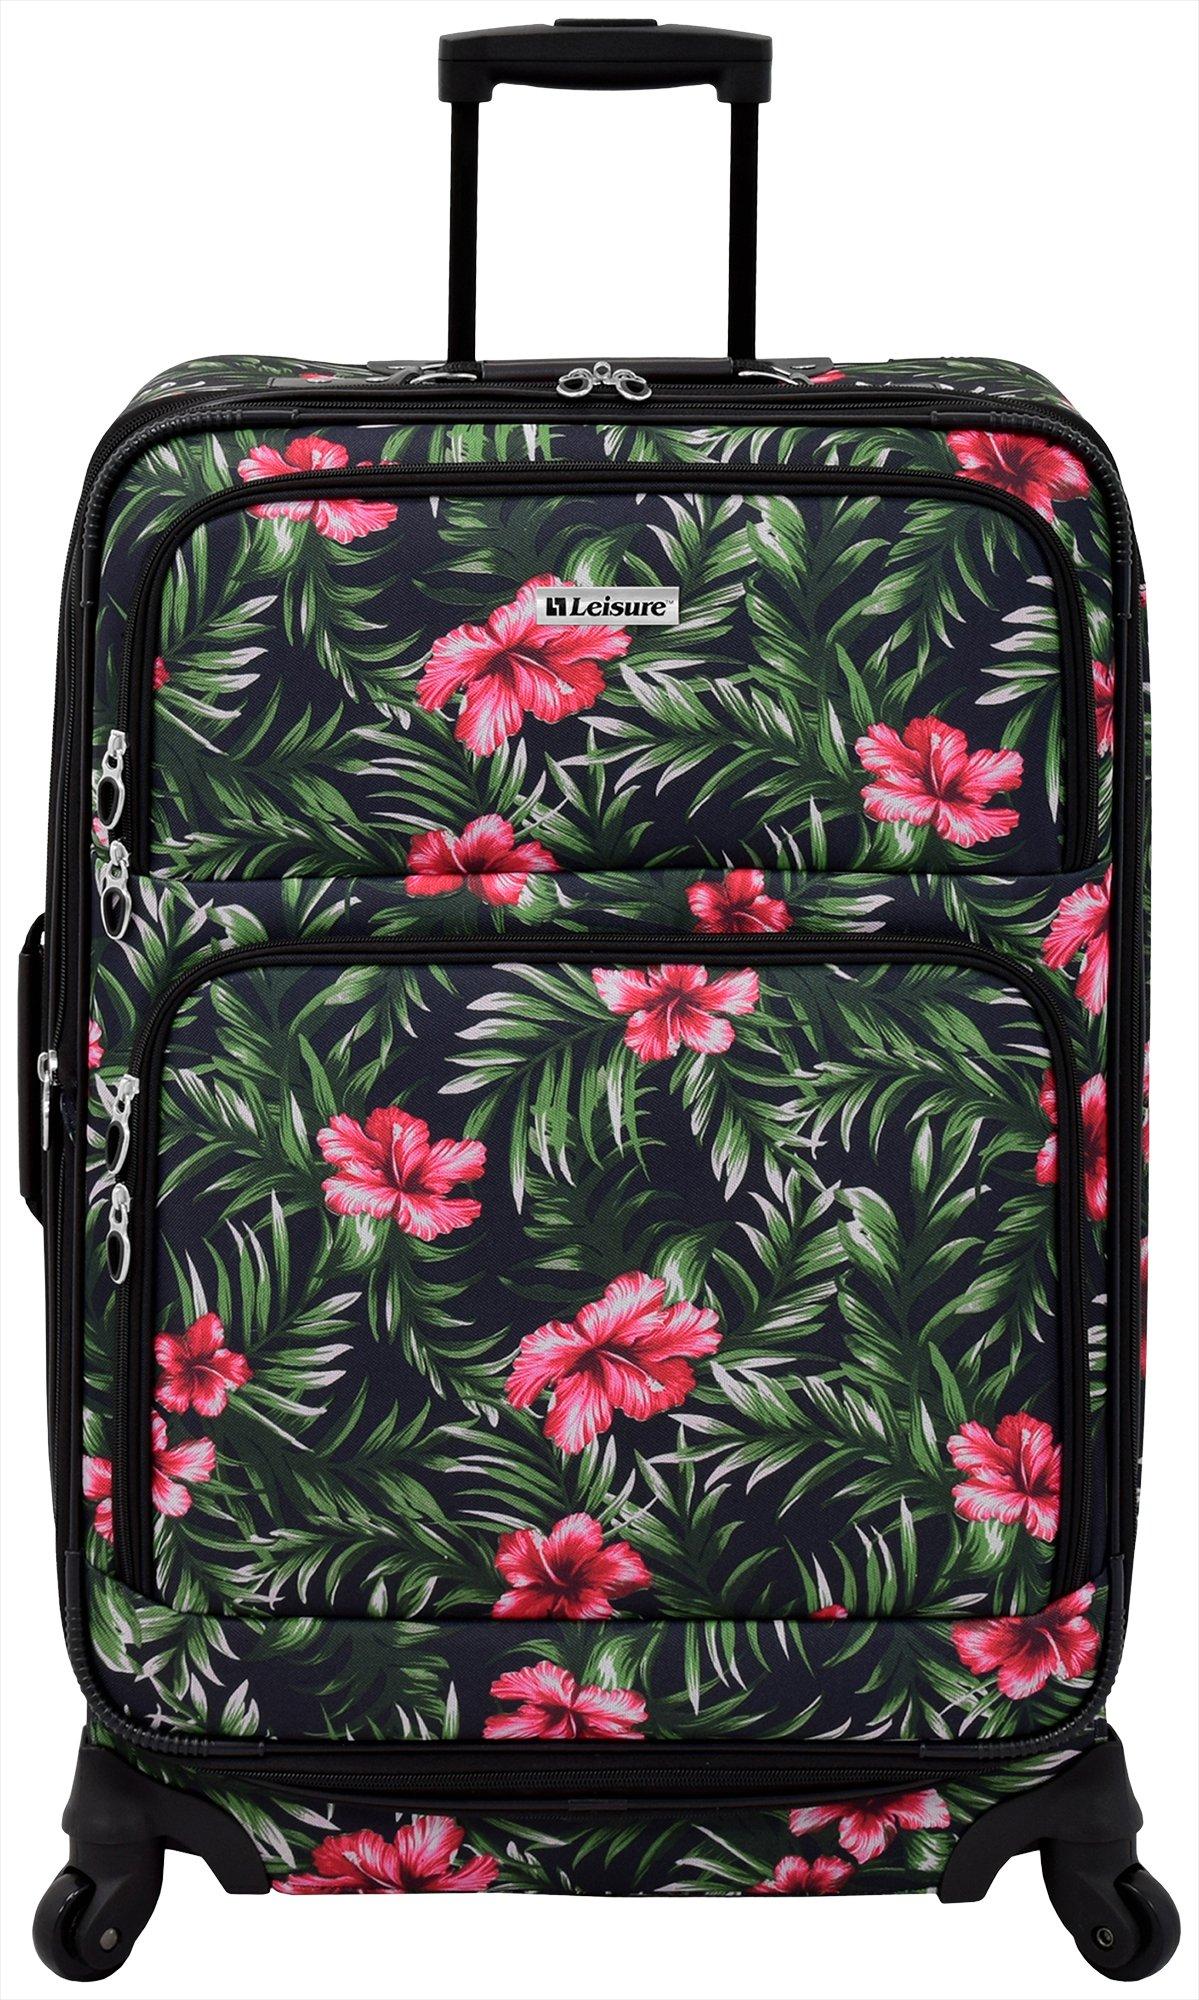 Leisure Luggage 29'' Lafayette Hibiscus Palm Spinner Luggage